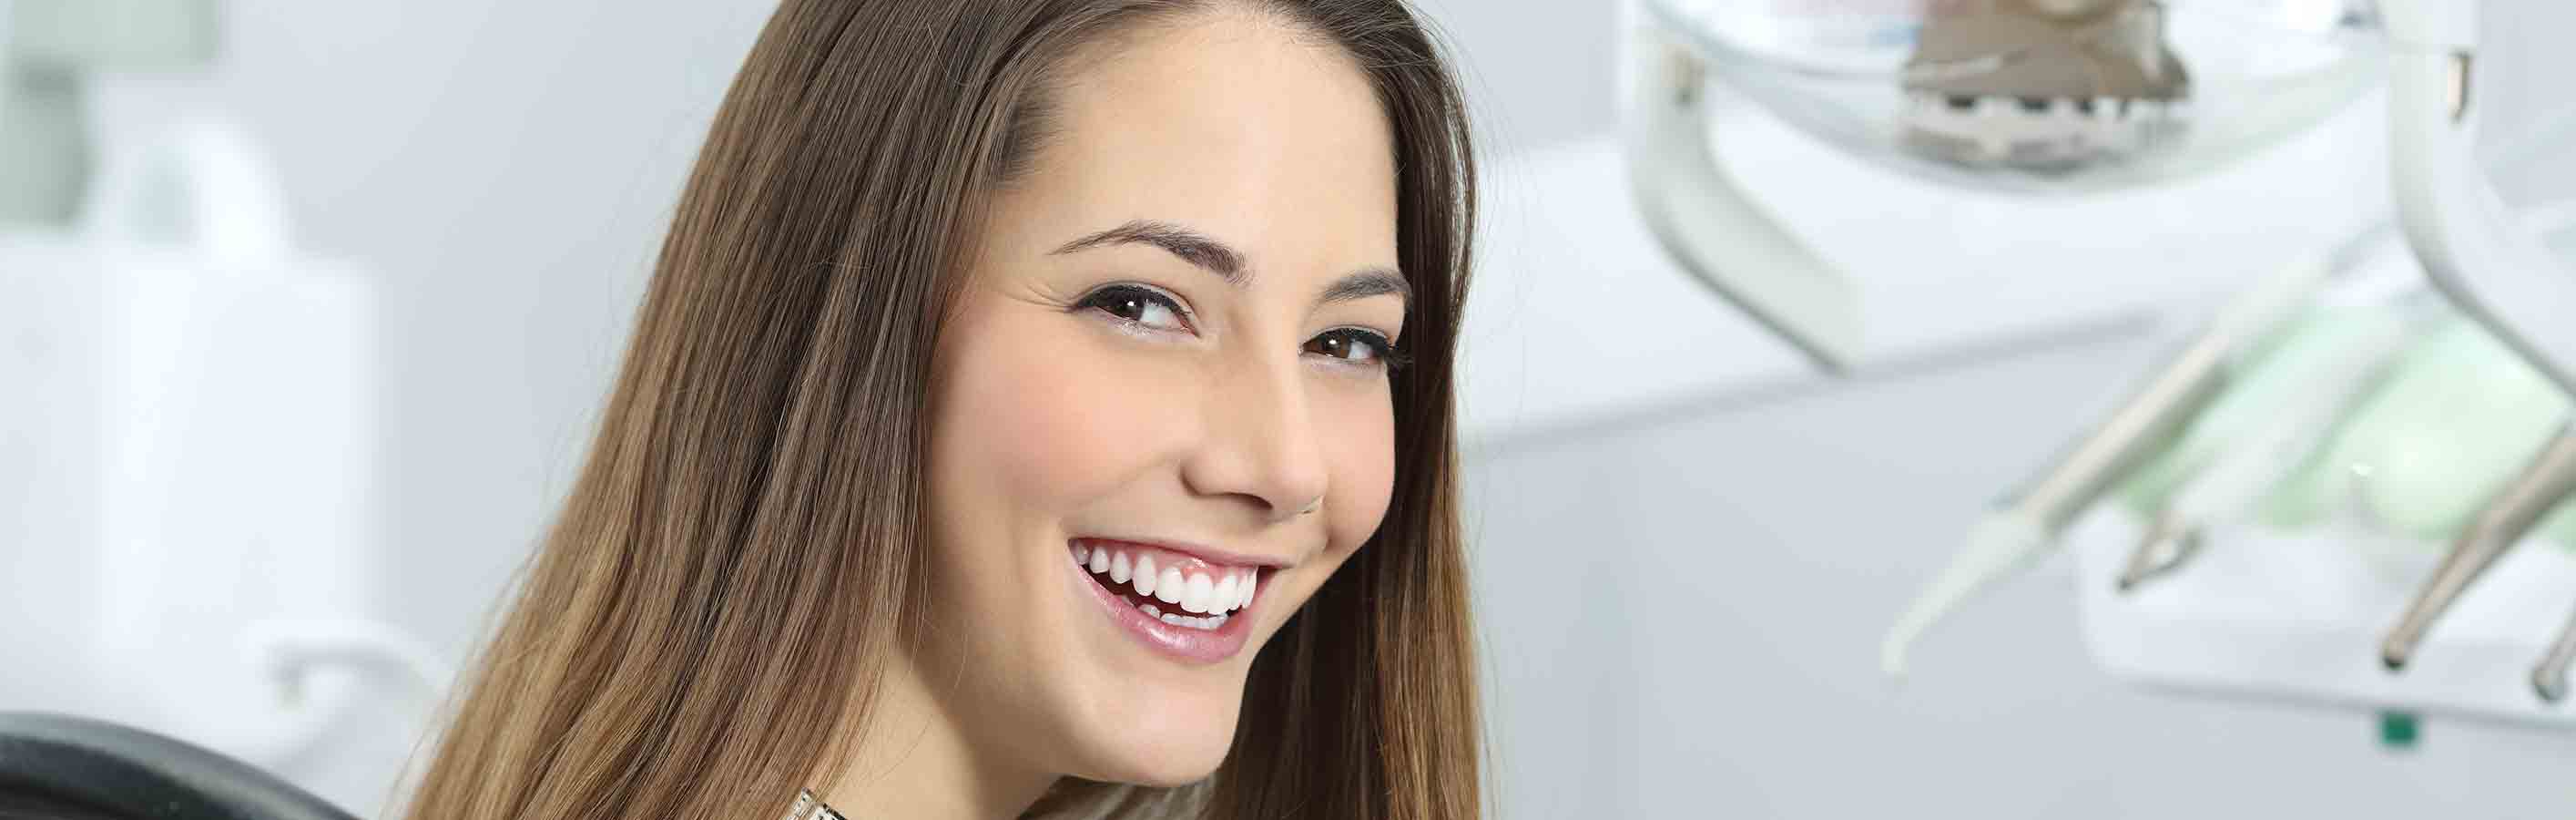 Teeth Whitening in Columbia, MD | Today’s Smile Dental